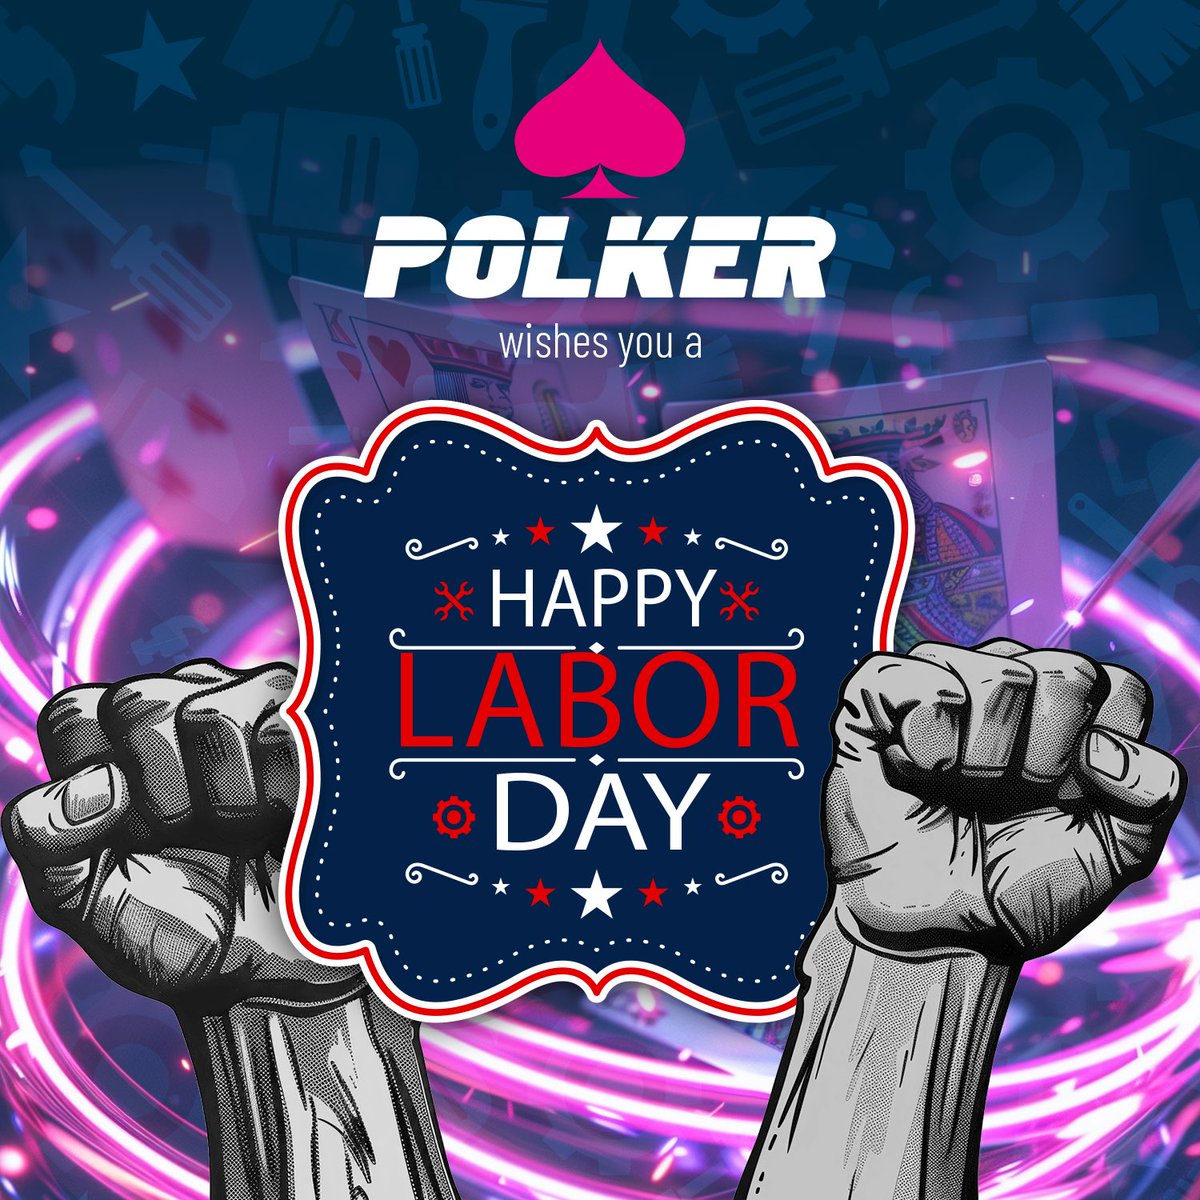 ♣️♥️♠️♦️#POLKERCREW♦️♠️♥️♣️ It's Labor Day! A day to celebrate the hard work and dedication of all the hardworking people who keep our industries running. 👷‍♂️👨‍🏭👩‍🏫 No matter your job or career path, we all play a vital role in making the world go round. 👨‍💻 💪 So whether you’re…